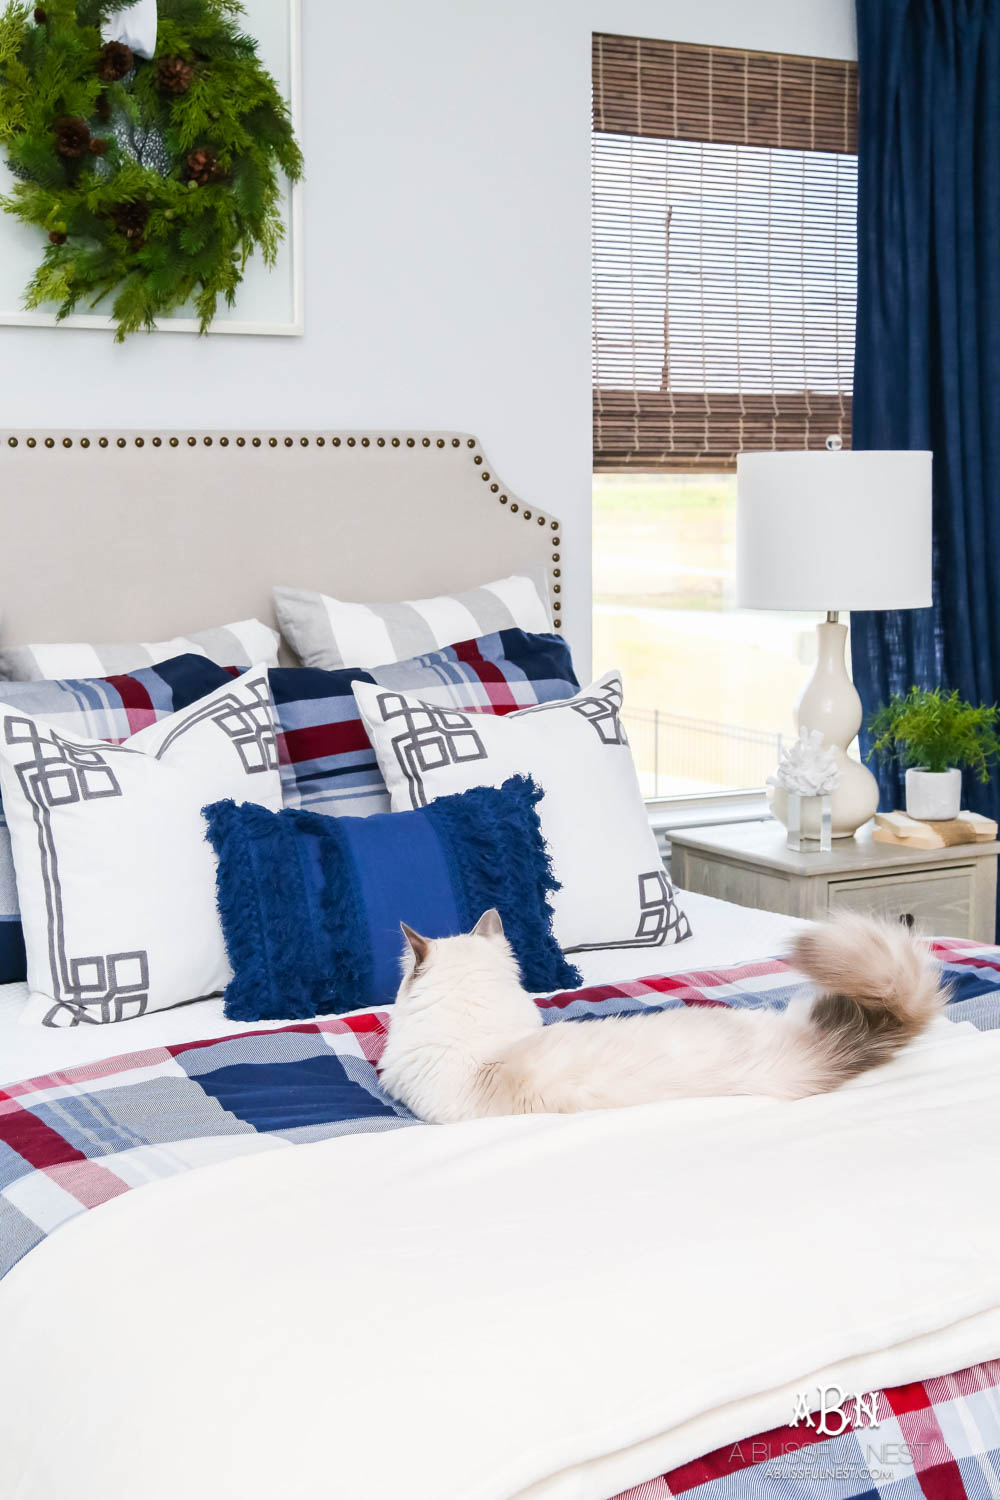 Jazz up your guest bedroom with beautiful plaid bedding and cozy essentials from Kohl's! #ad #WinterBedding #KohlsFinds #guestbedroom #plaid